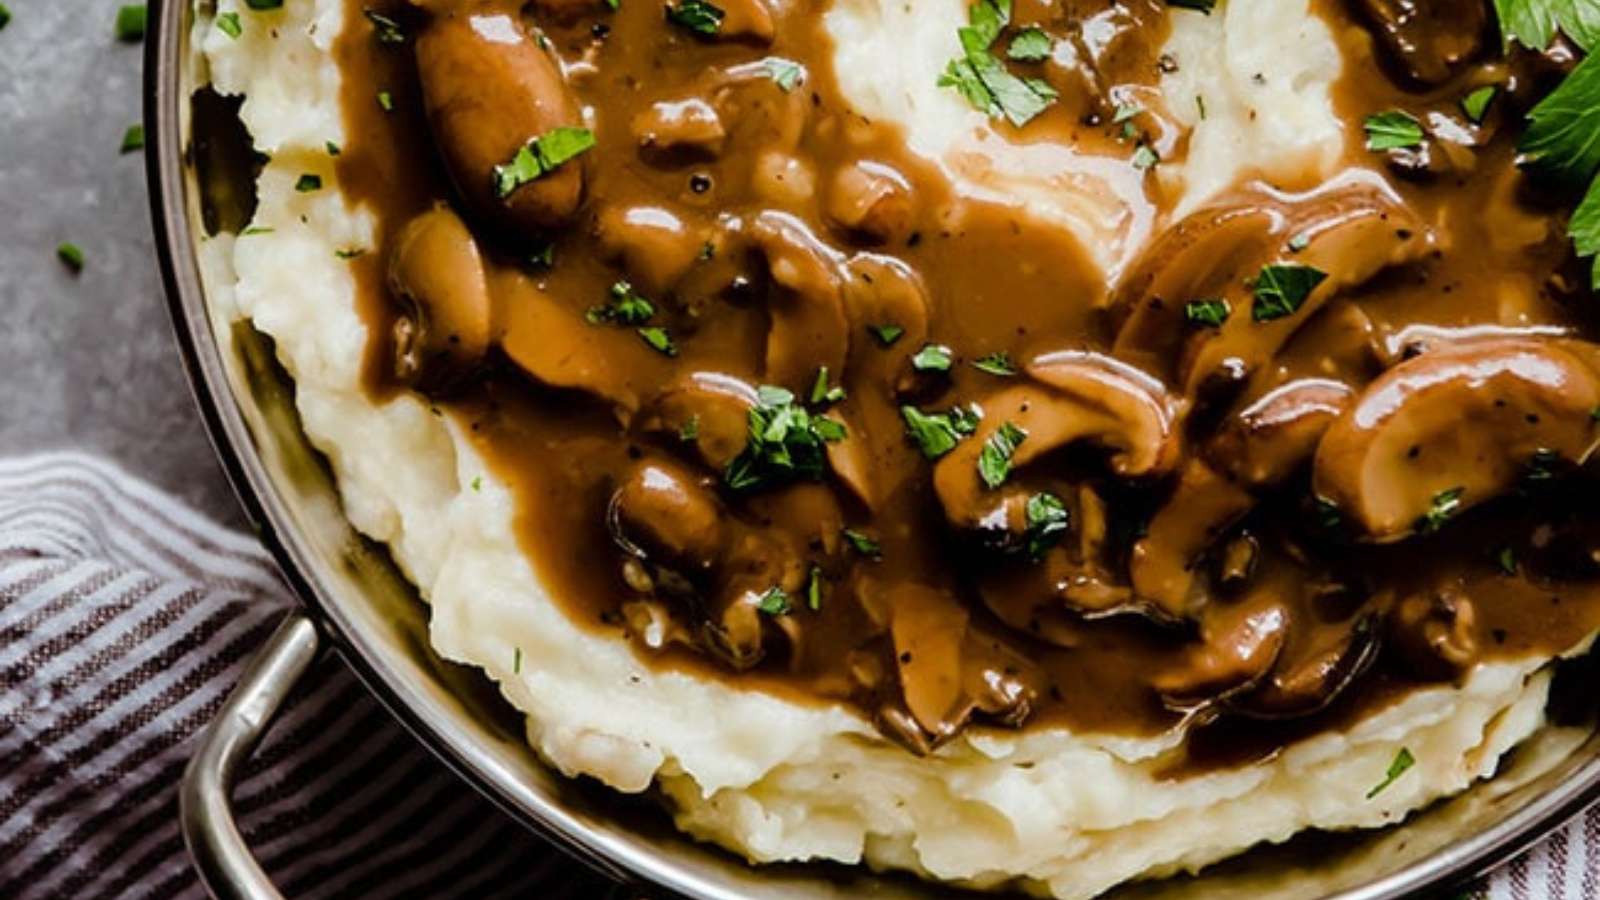 A bowl of mashed potatoes with gravy and mushrooms, enhanced with a touch of Guinness beer.